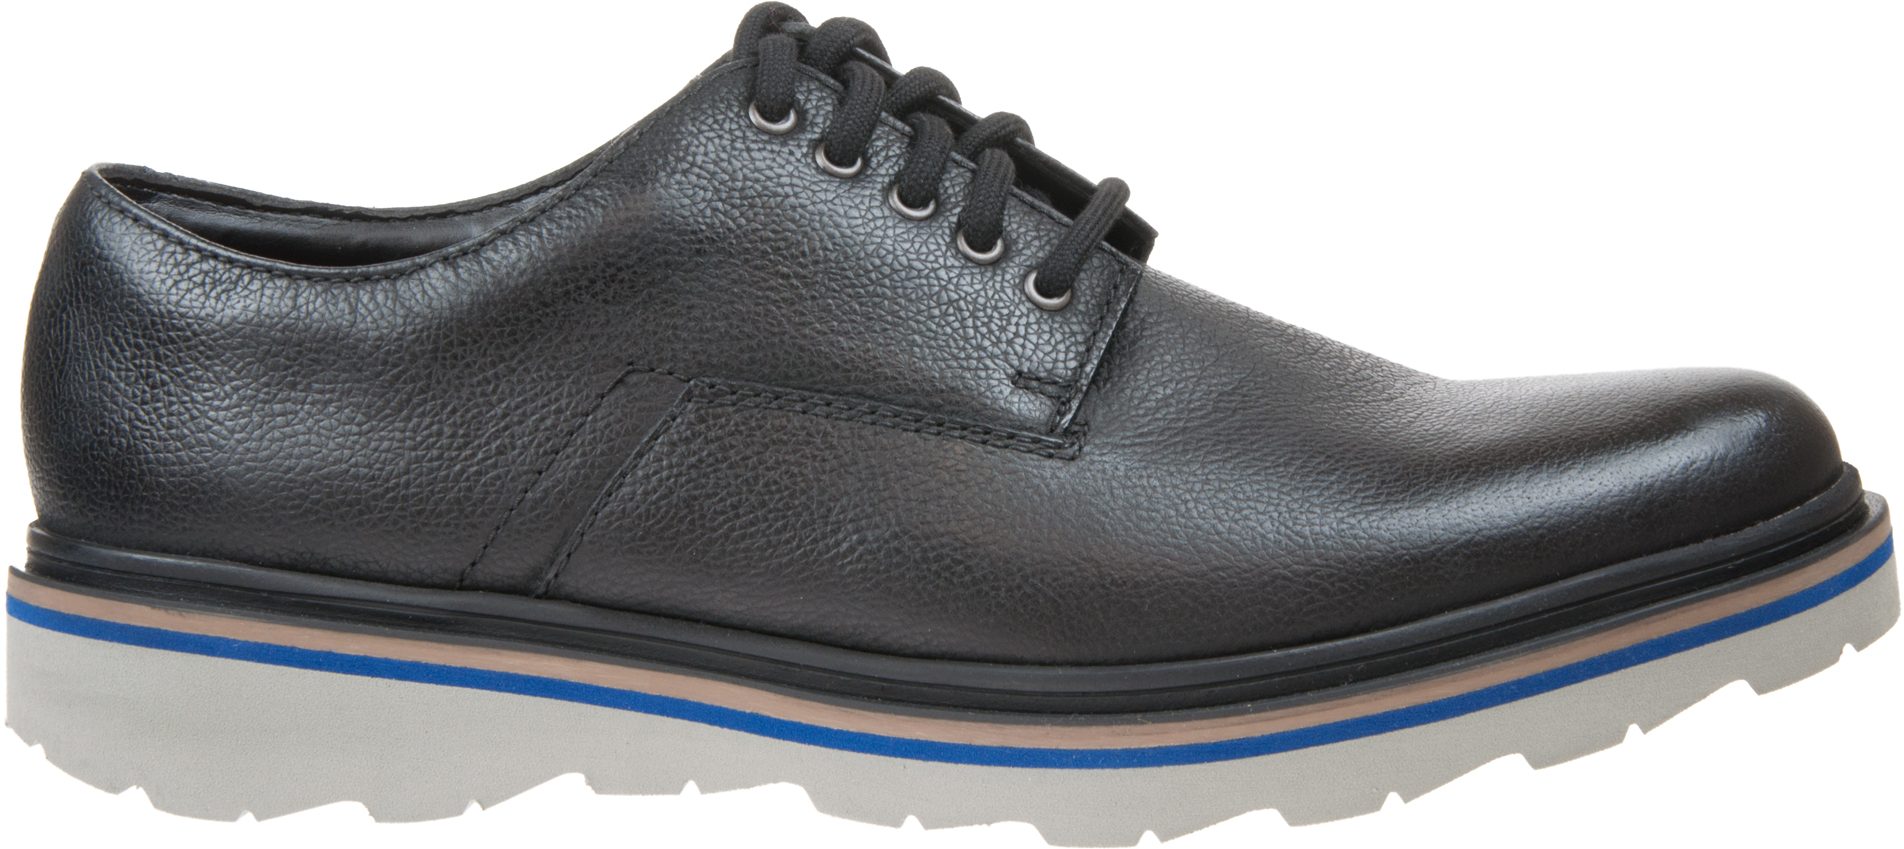 Clarks Frelan Edge Black Leather 26147289 - Casual Shoes - Humphries Shoes